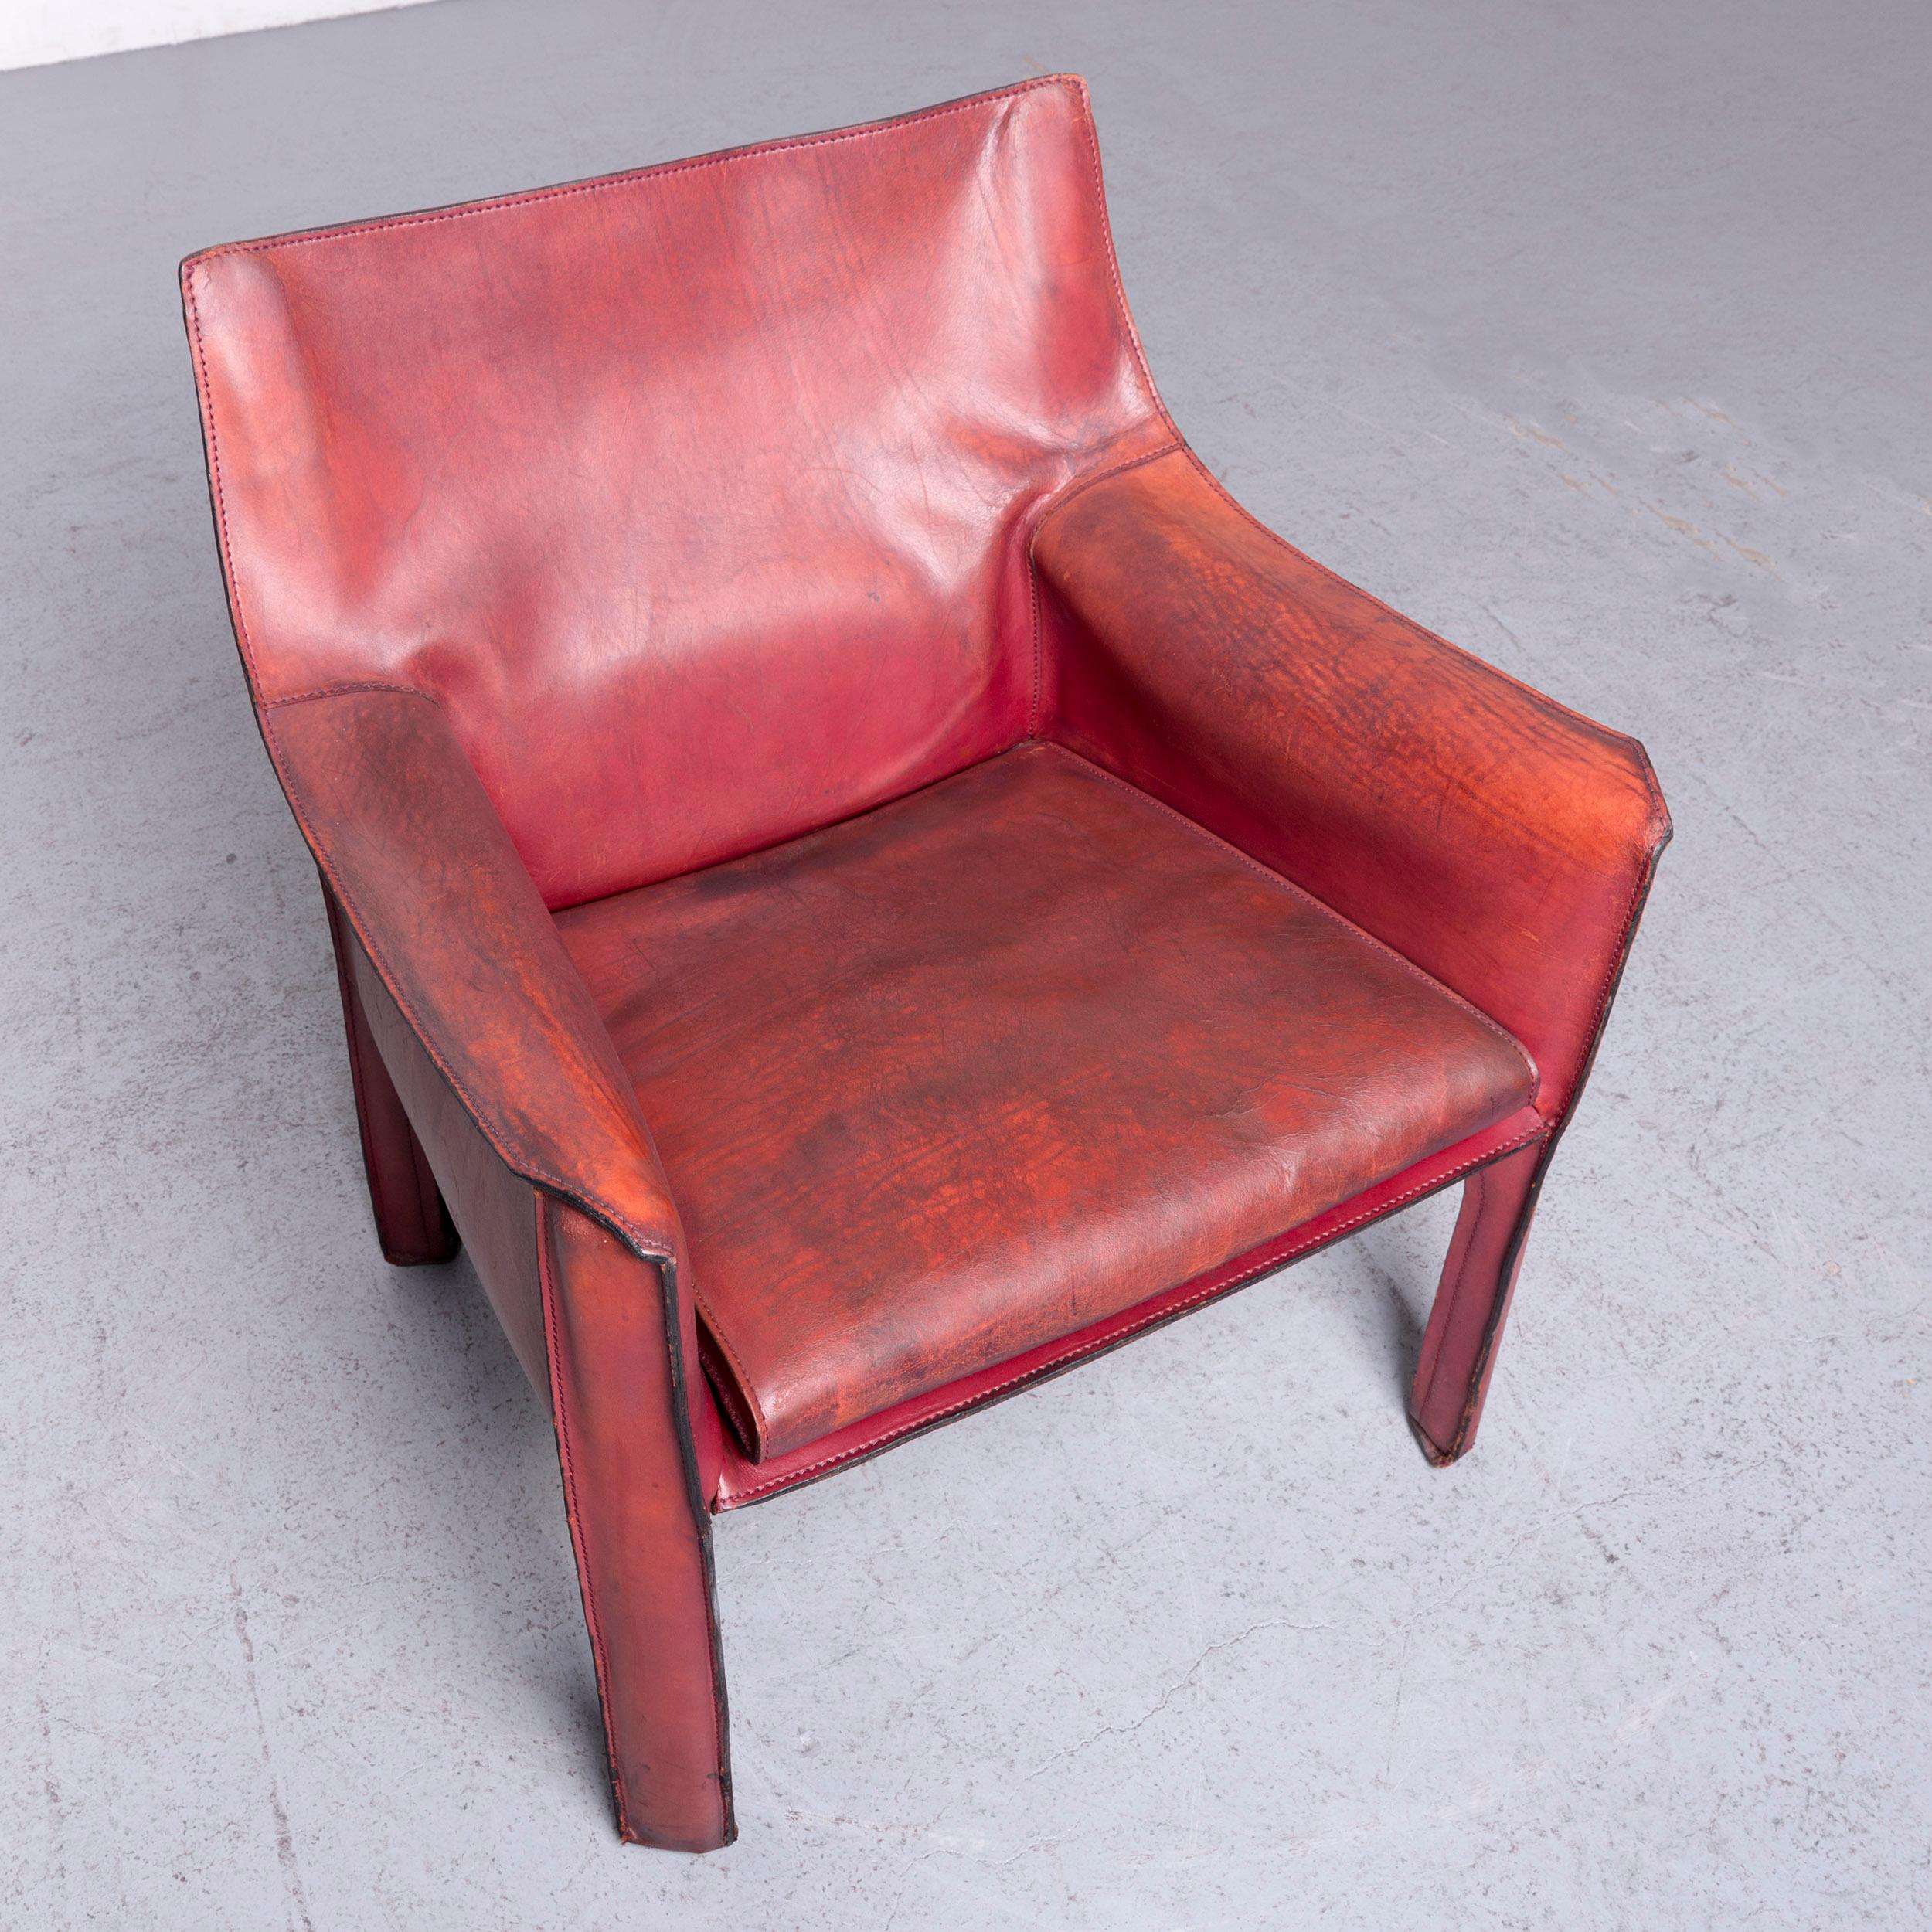 Bauhaus Cassina Cab 414 Vintage Leather Armchair Red by Mario Belinni 1970-1979